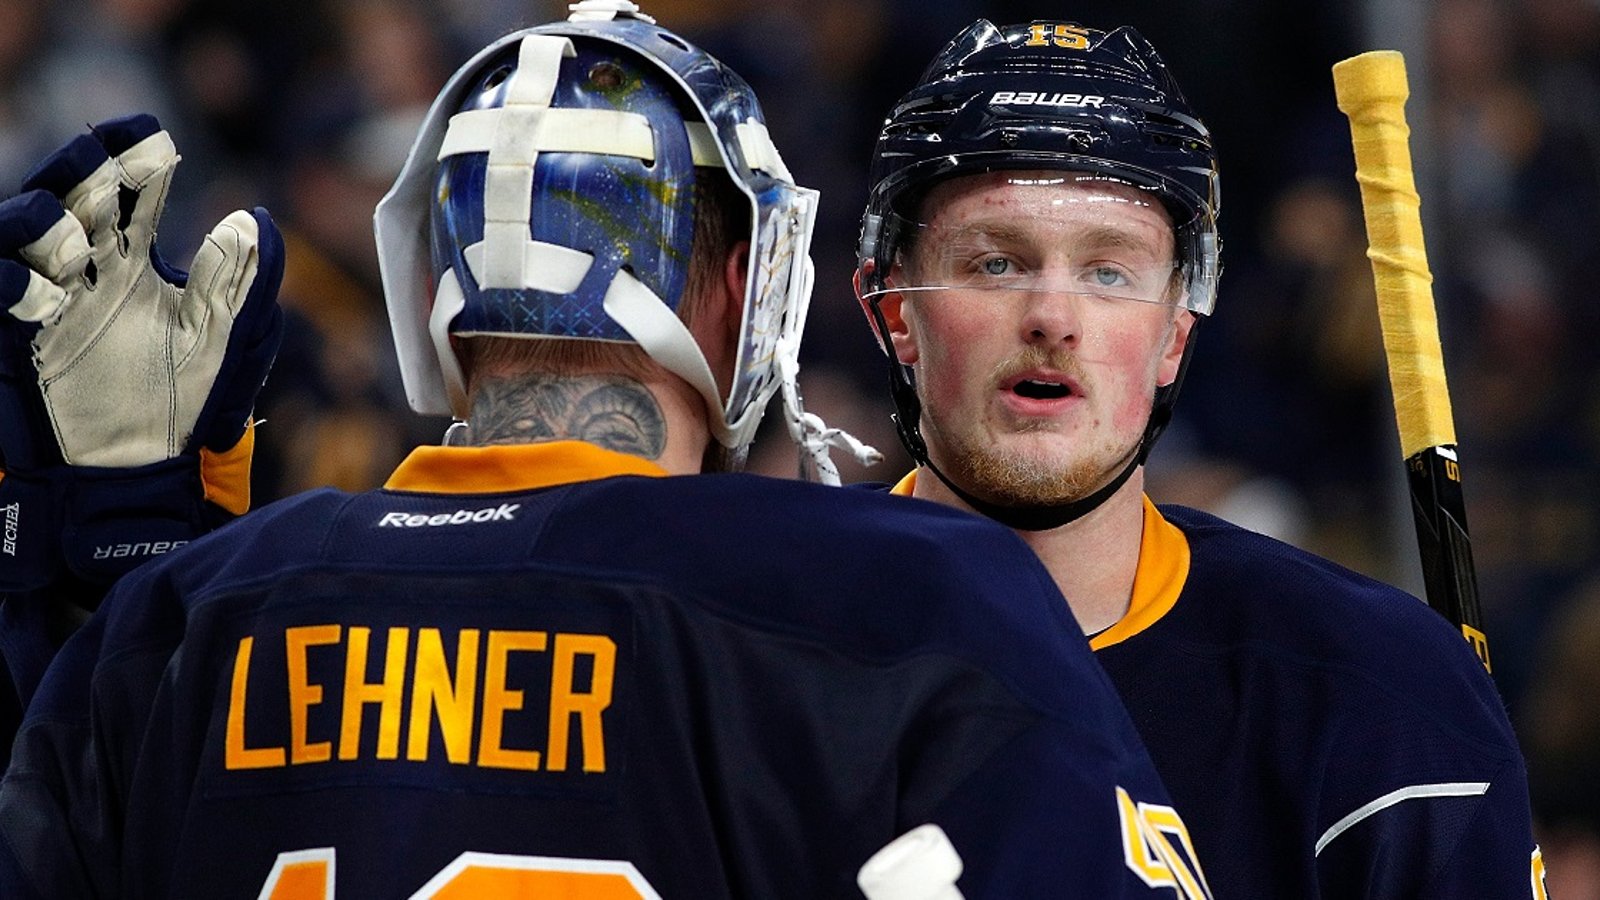 Robin Lehner rips the NHLPA, Buffalo Sabres and journalists over the Jack Eichel situation.